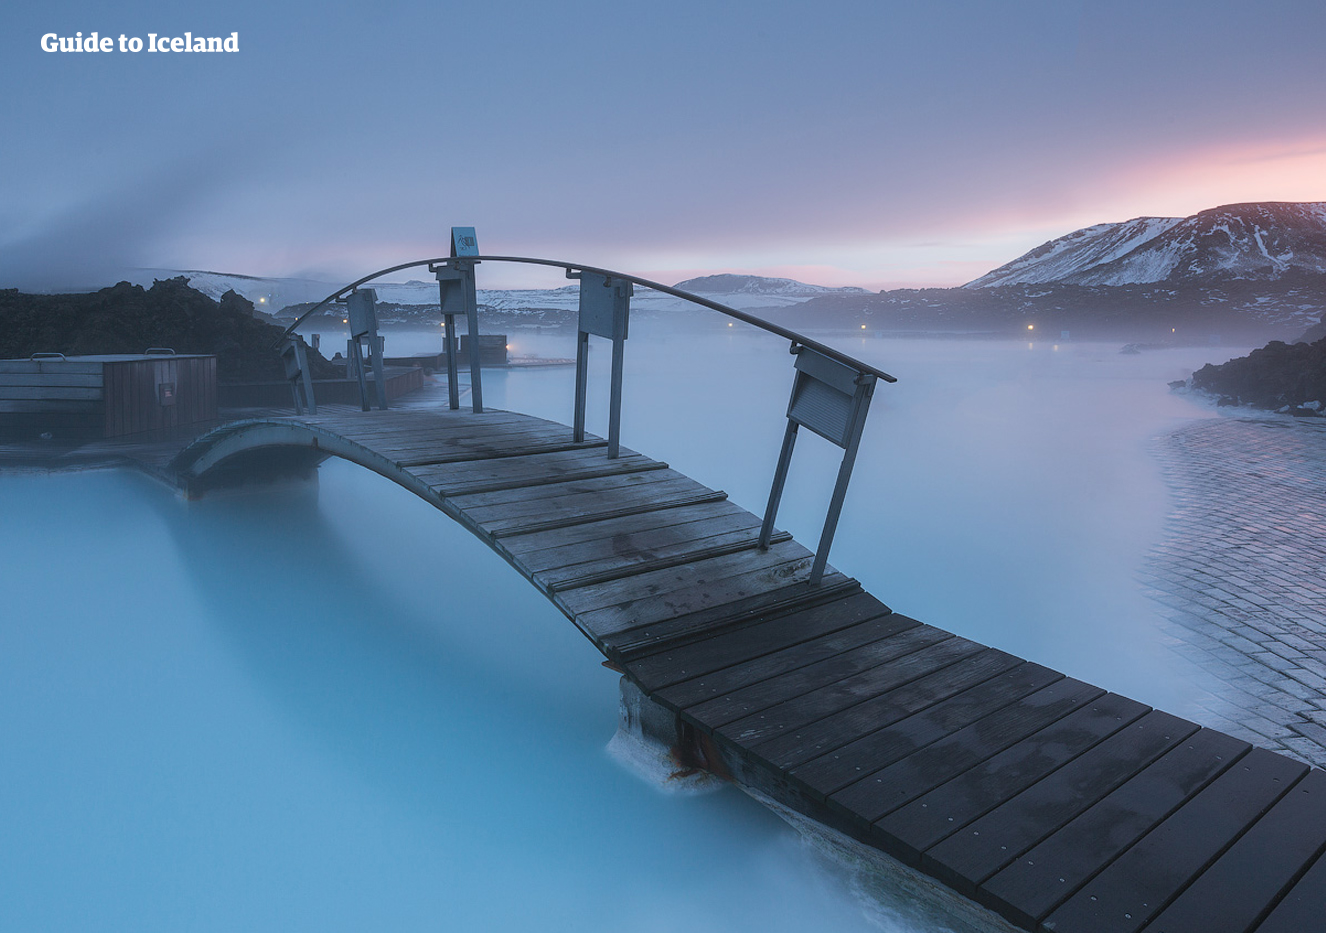 Before taking a flight home or to another destination, the Blue Lagoon Spa on the Reykjanes Peninsula offers a great chance to recharge.